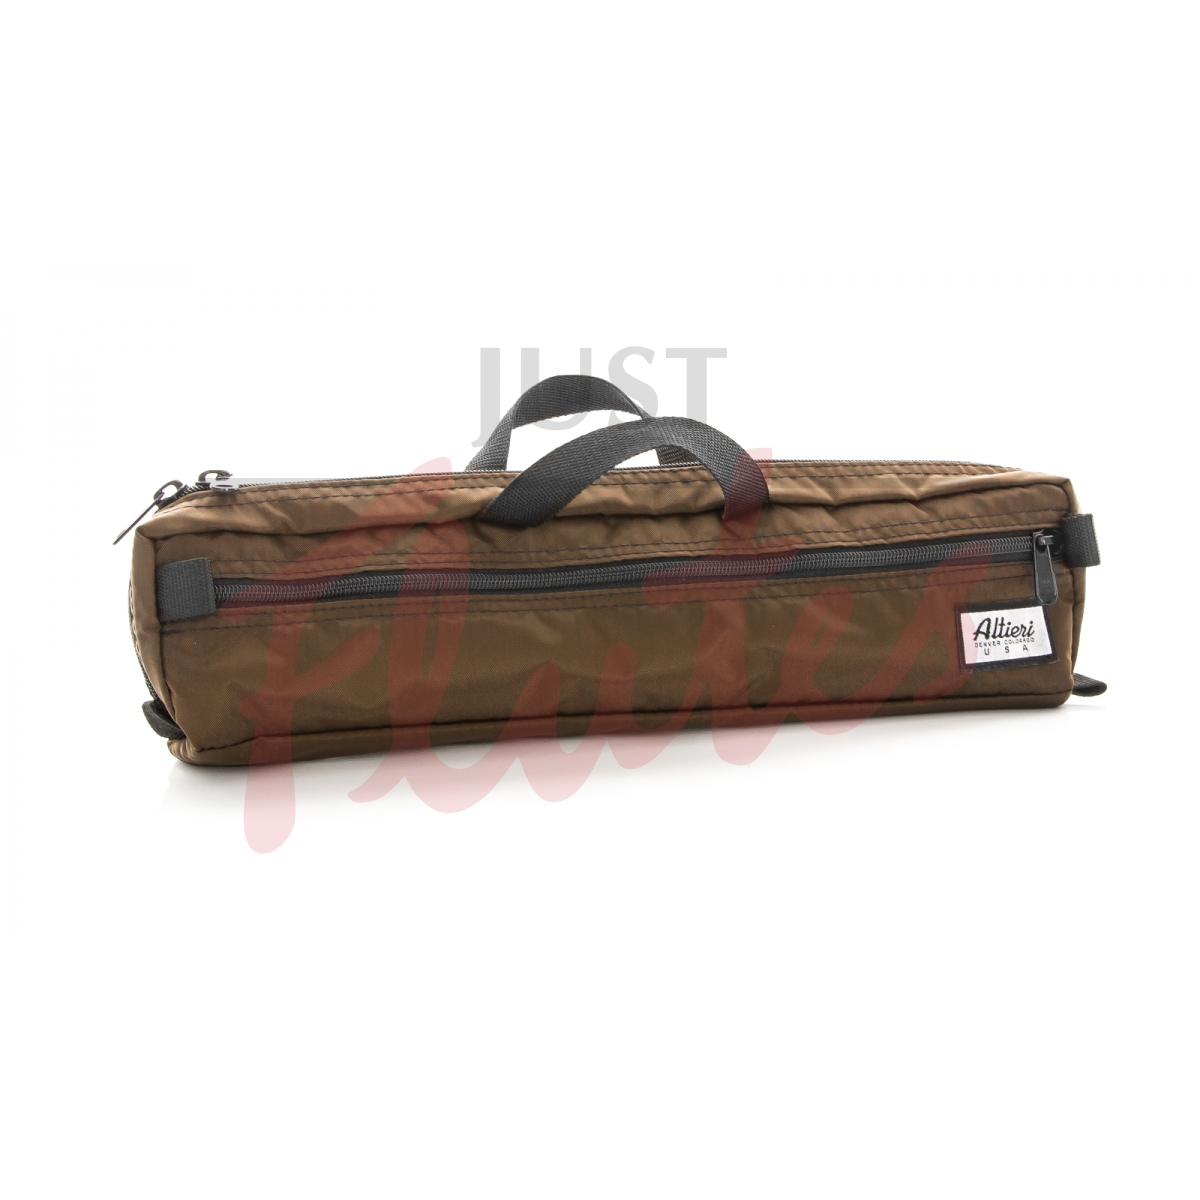 Altieri FLCC-BF-CH B-foot Flute Case Cover, Chocolate